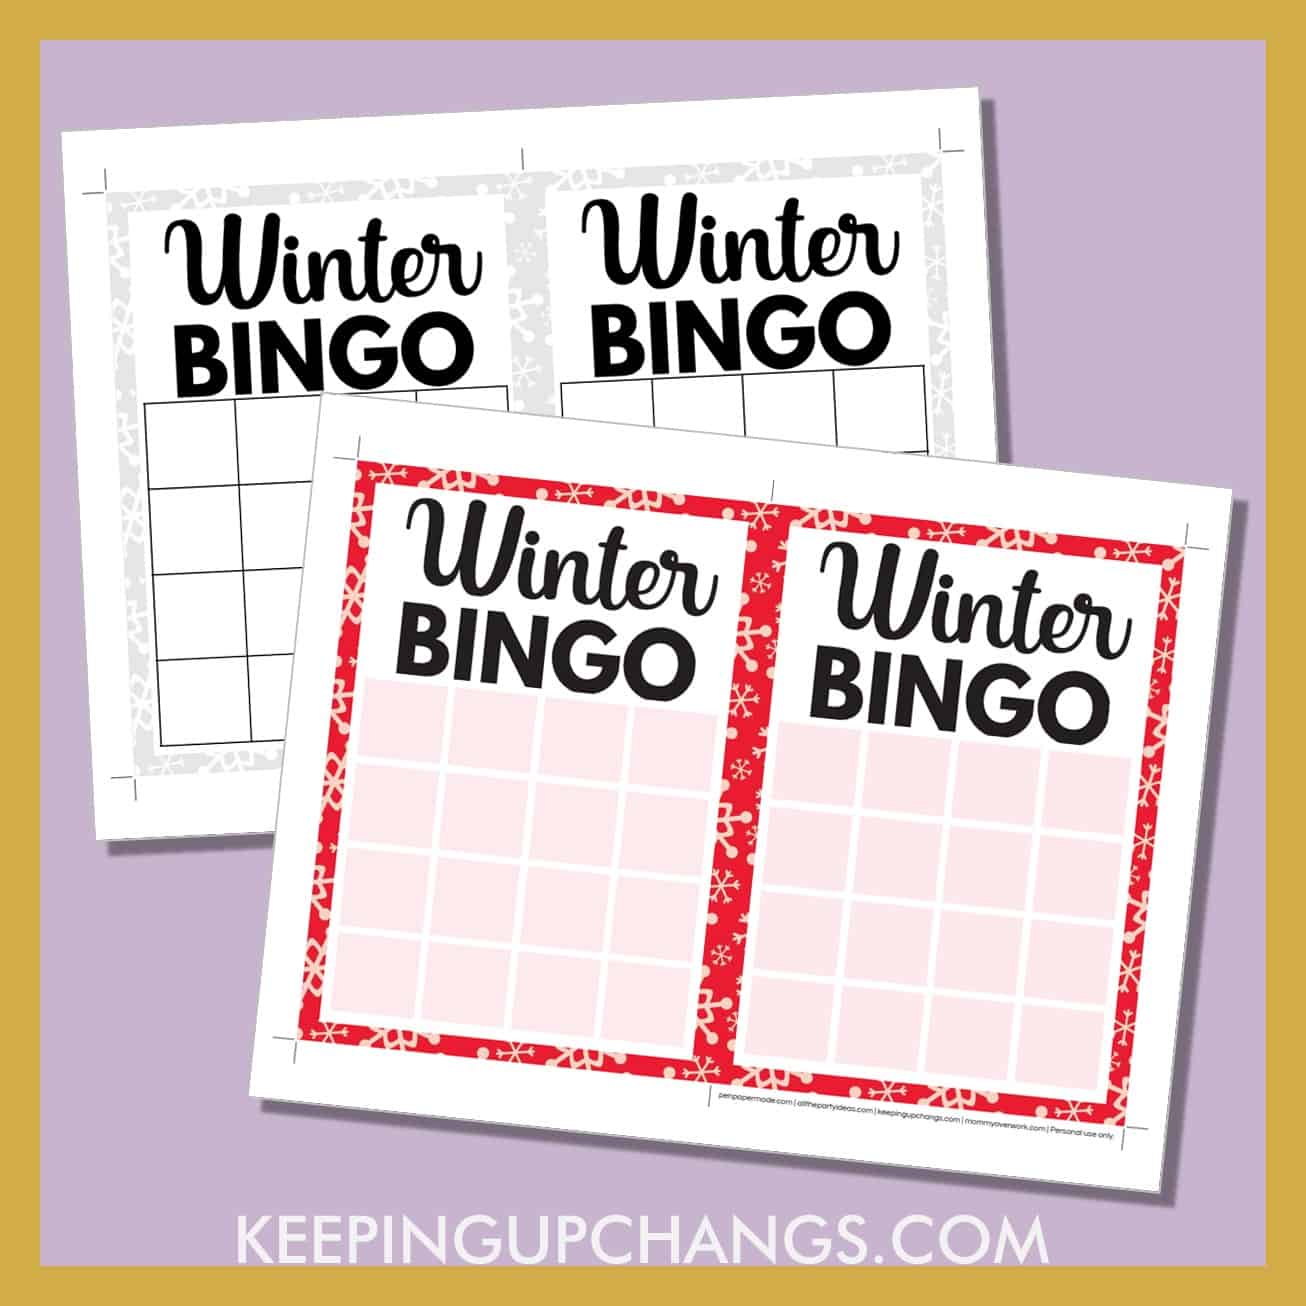 free winter bingo 4x4 grid game board blank template in color, black and white.